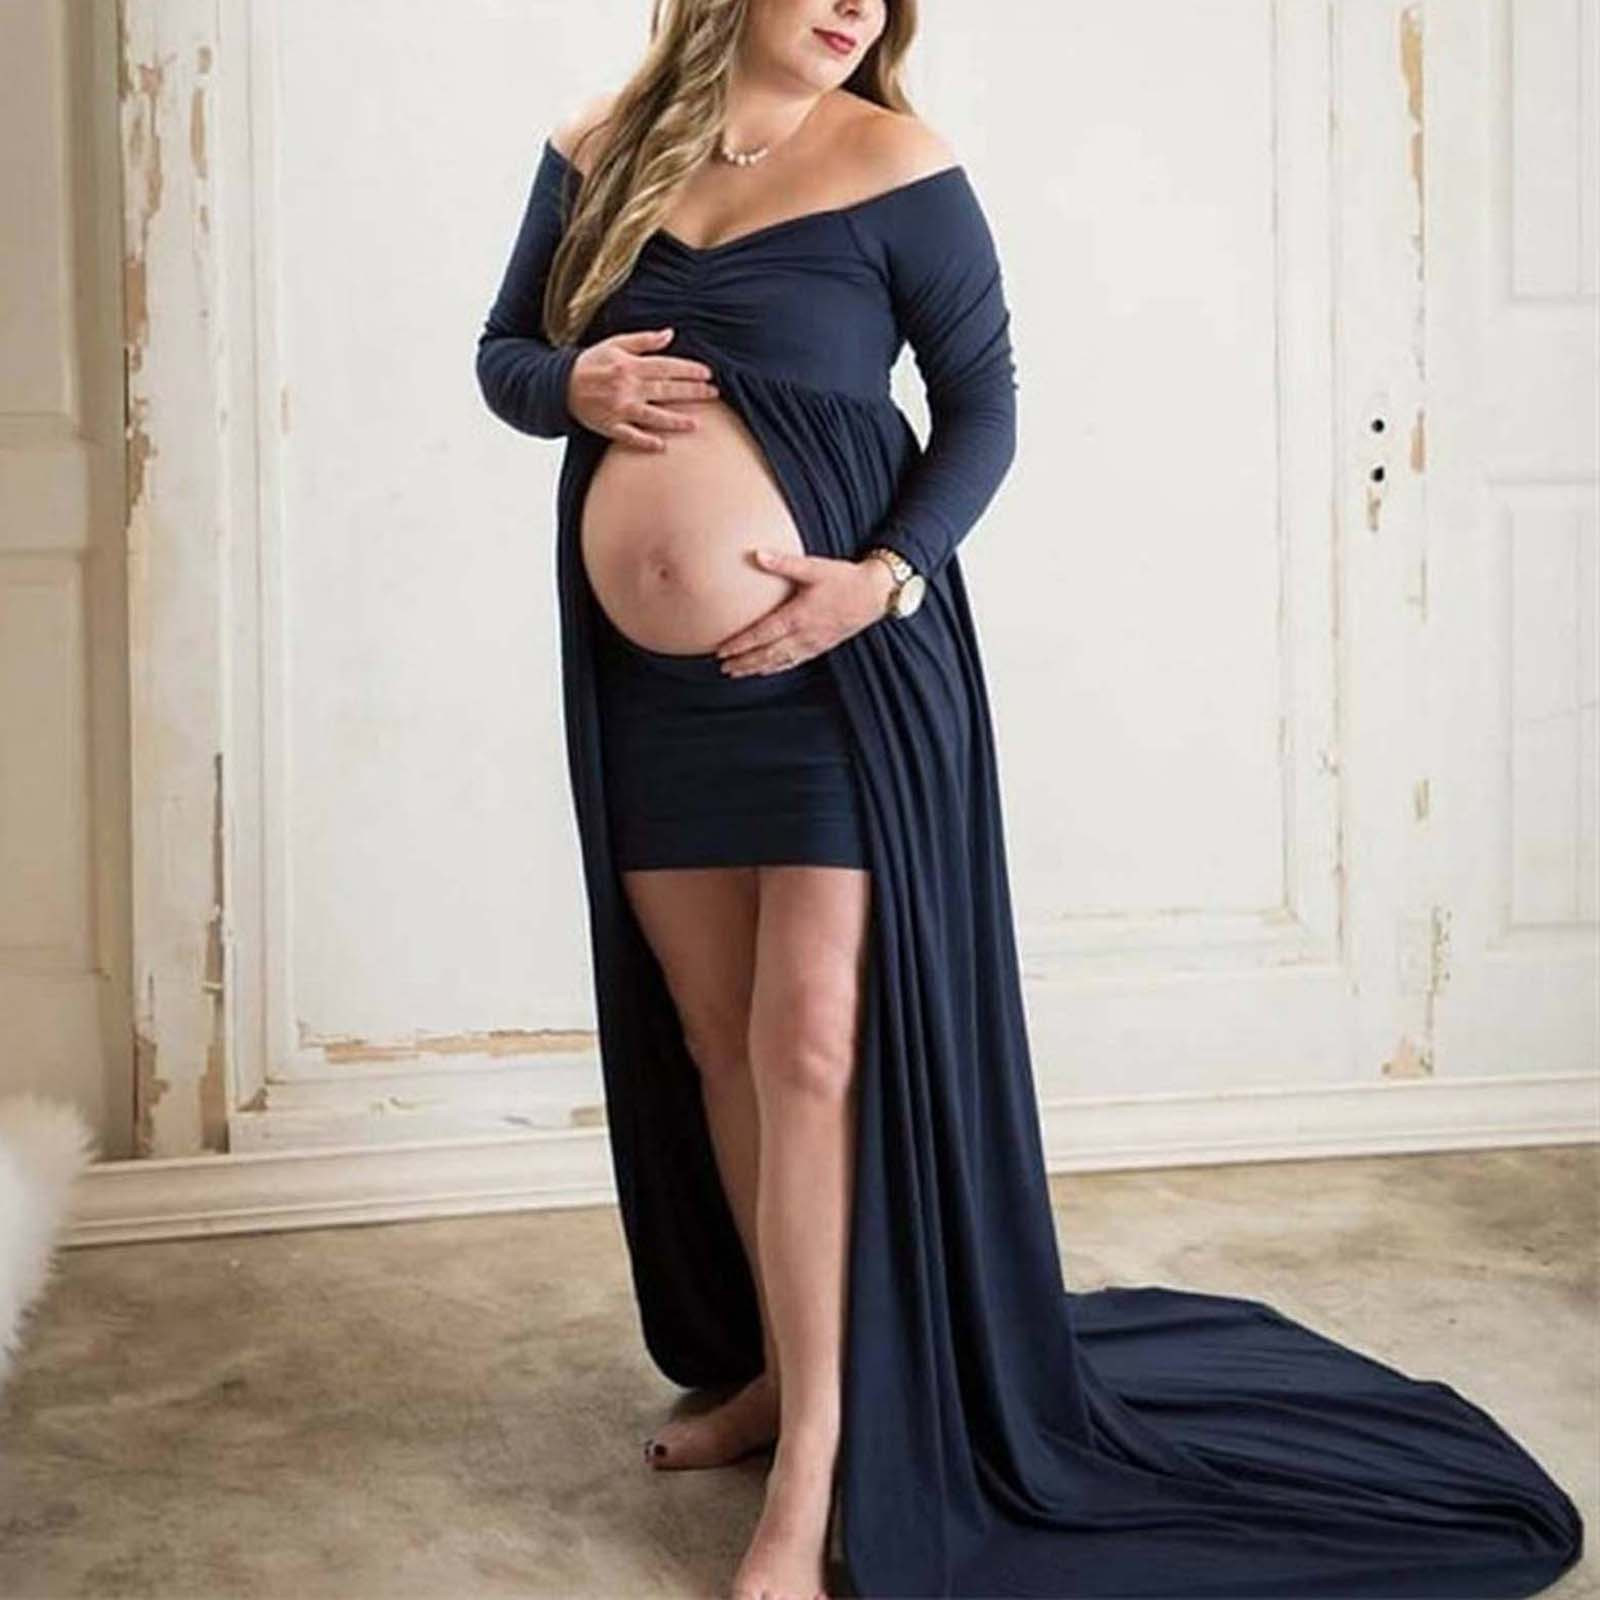 gakvov Maternity Dress For Photoshoot Savings Clearance Items!Womens Maternity Photography Props One-shoulder Solid Color Long-sleeved Dress - image 1 of 3